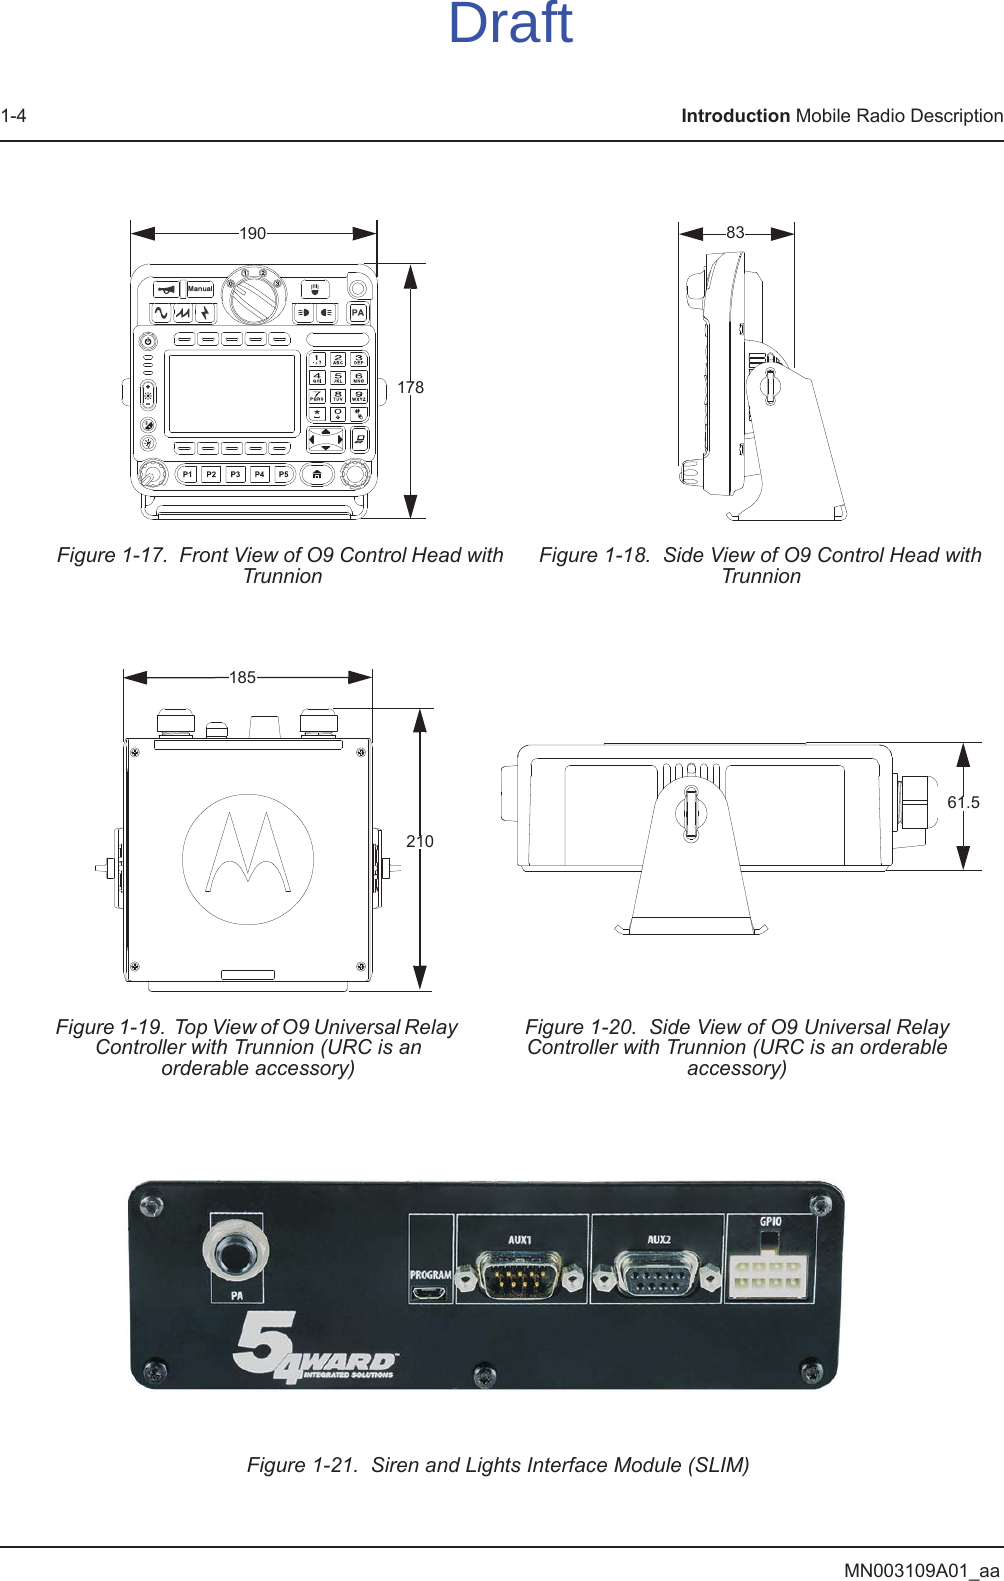 MN003109A01_aa1-4 Introduction Mobile Radio DescriptionFigure 1-21.  Siren and Lights Interface Module (SLIM)Figure 1-17.  Front View of O9 Control Head with TrunnionFigure 1-18.  Side View of O9 Control Head with TrunnionFigure 1-19.  Top View of O9 Universal Relay Controller with Trunnion (URC is an orderable accessory)Figure 1-20.  Side View of O9 Universal Relay Controller with Trunnion (URC is an orderable accessory)178190 8318521061.5Draft